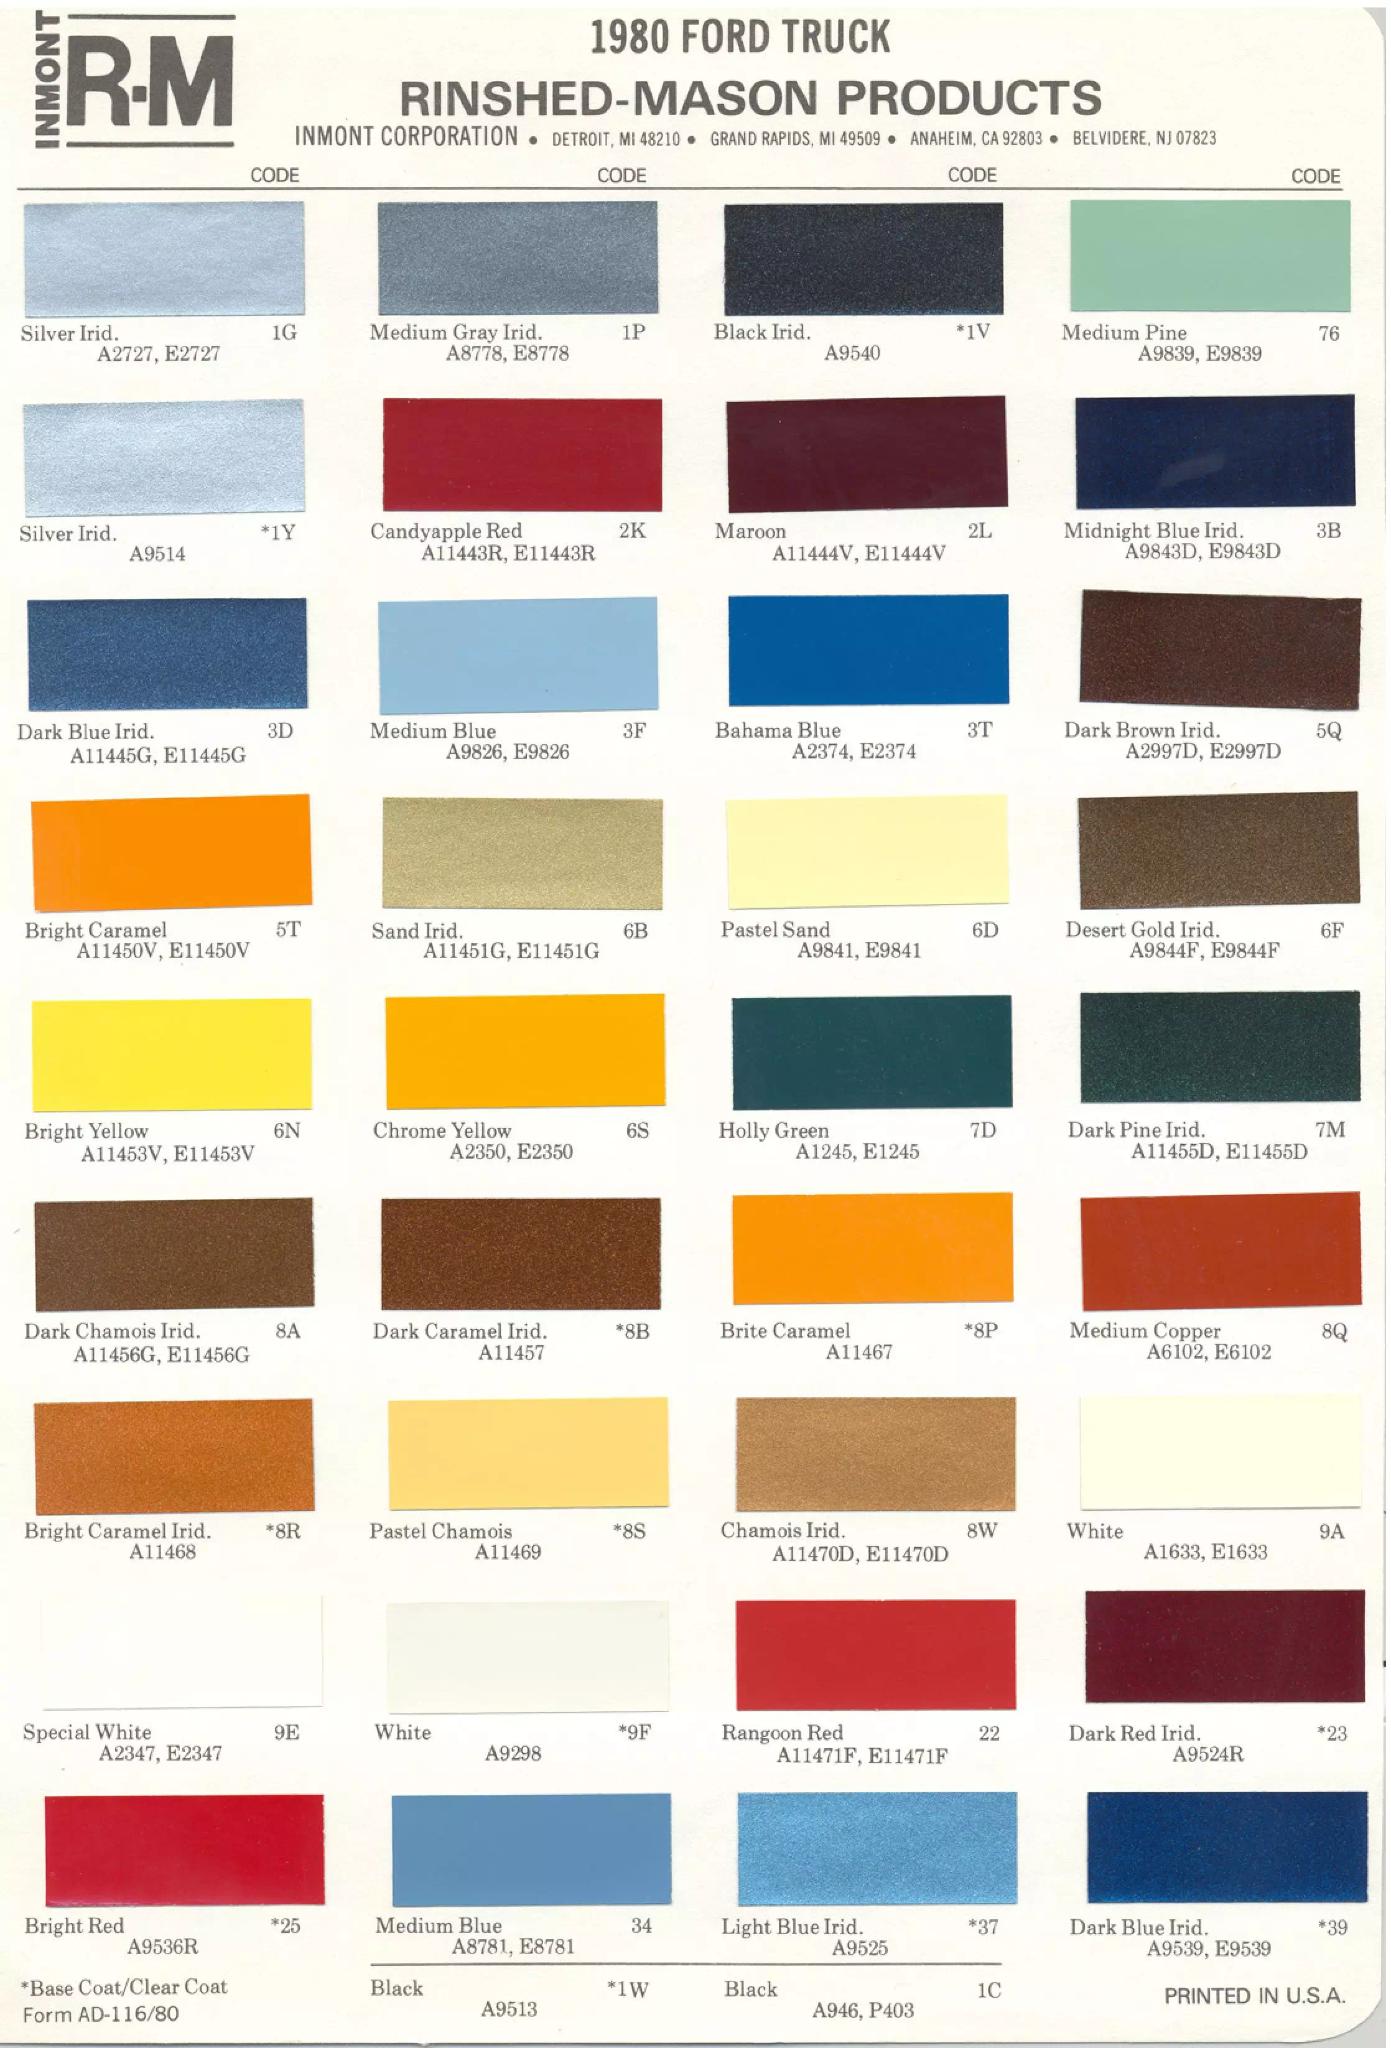 colors and codes used in 1980 on Ford Pickup Trucks